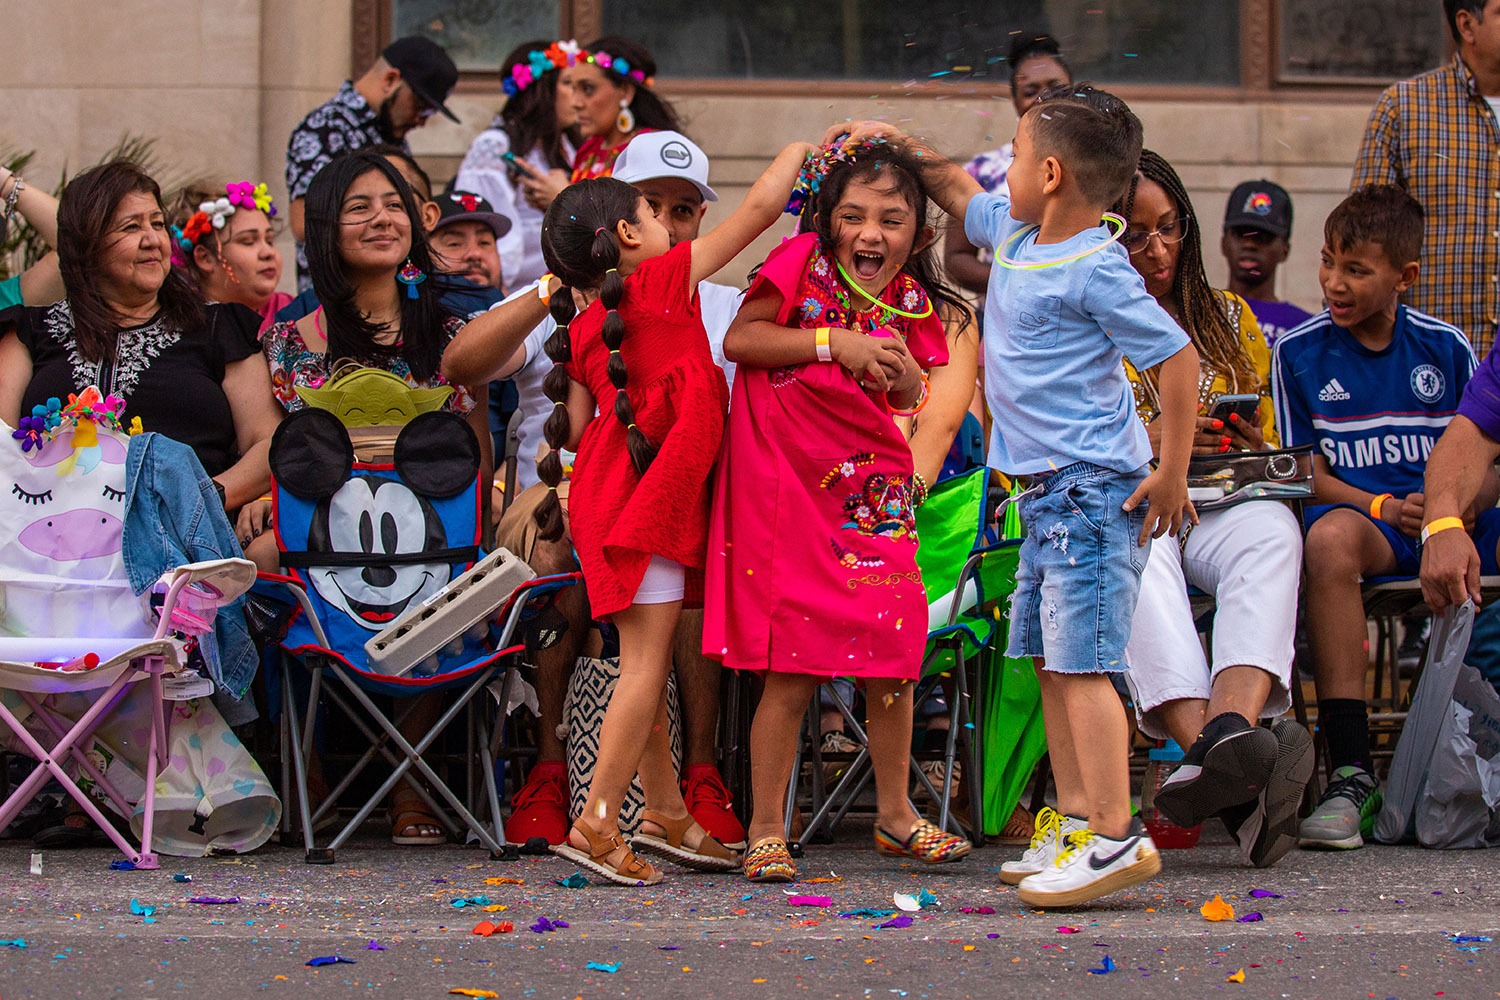 Thousands of people attend the Fiesta Flambeau Parade on Saturday, April 9, 2022, in San Antonio, Texas. Photo by Kaylee Greenlee Beal | Heron contributor